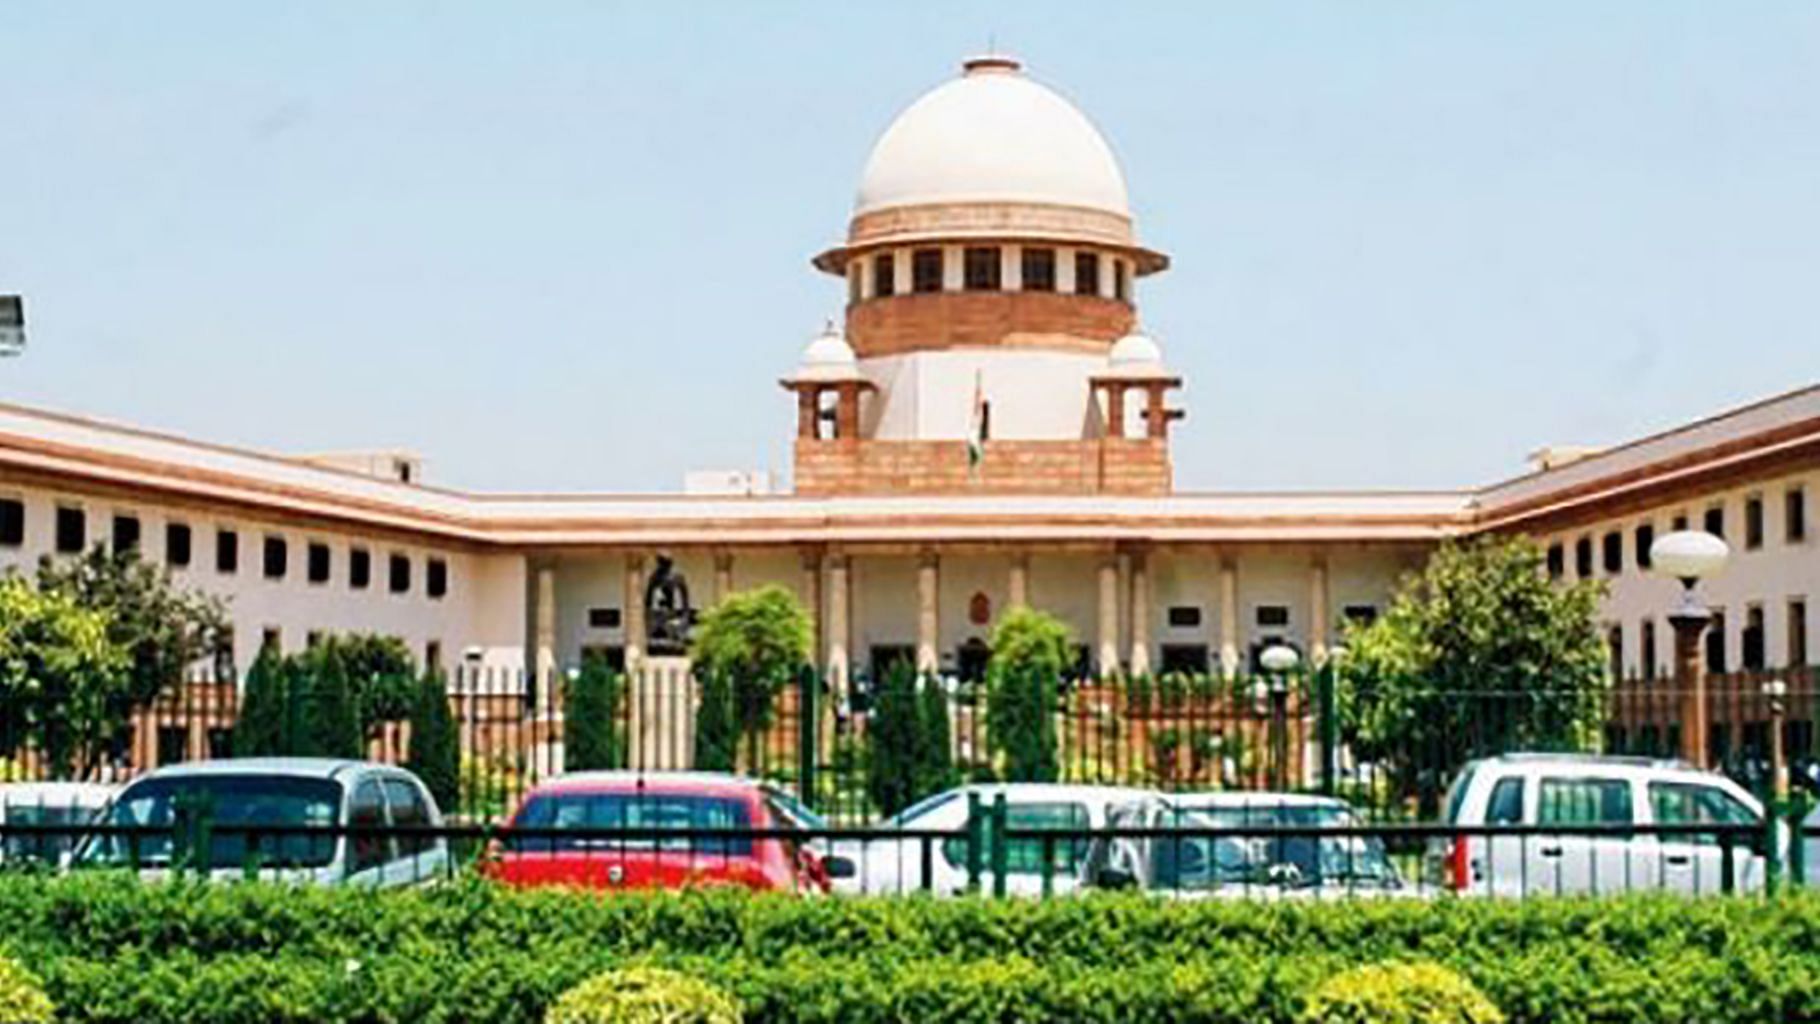 The Supreme Court of India. Image used for representational purposes.